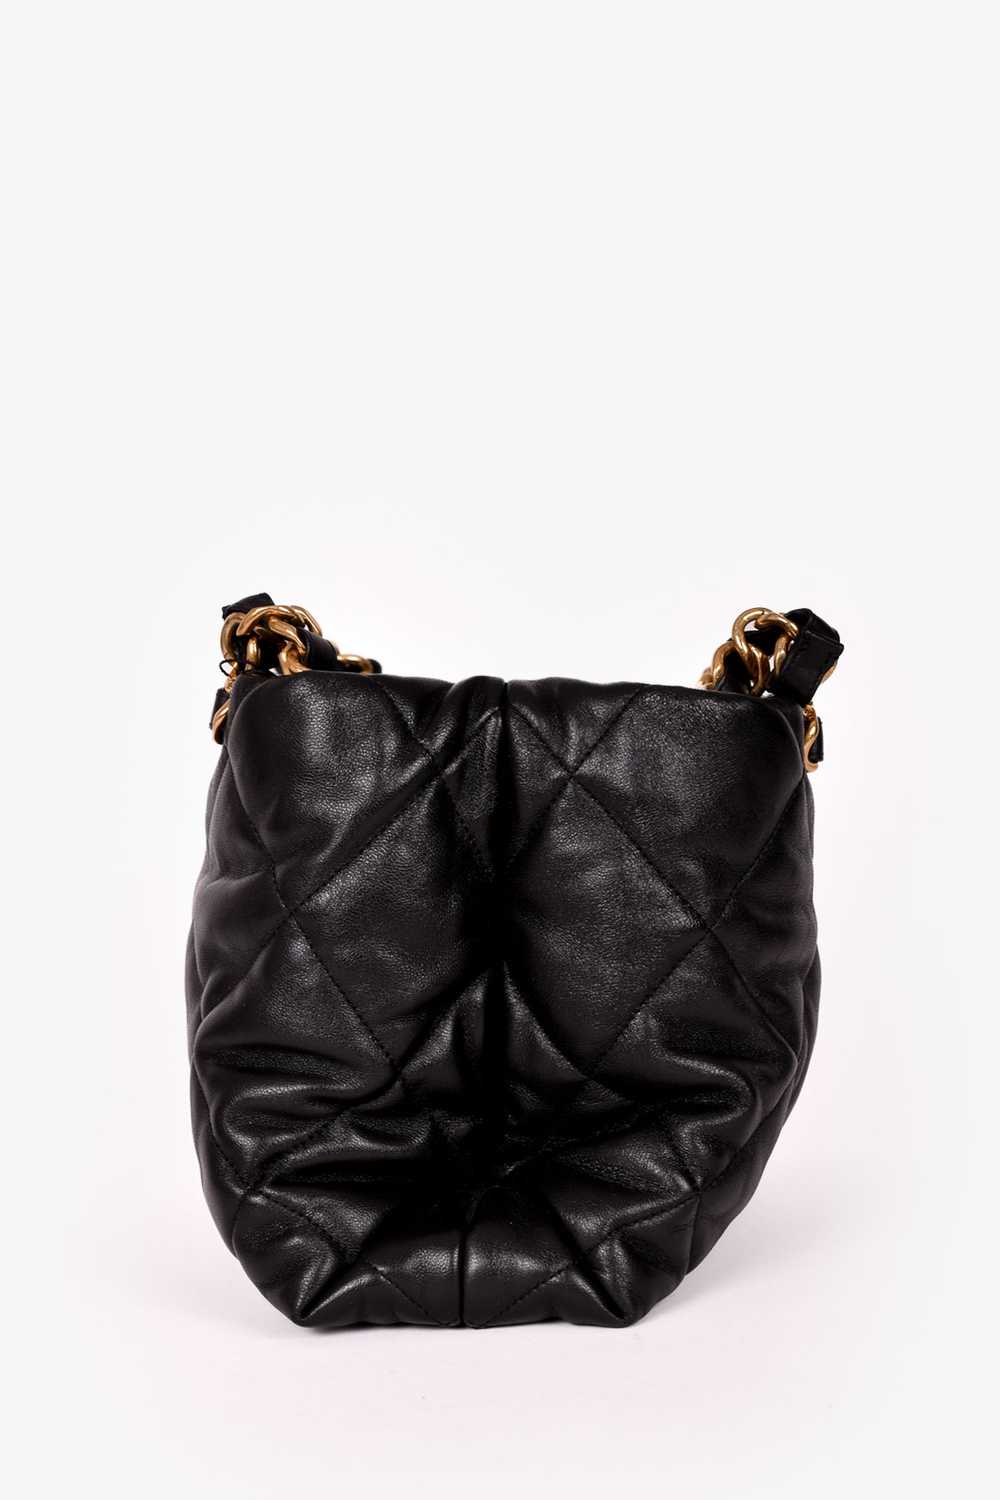 Pre-loved Chanel™ Black Lambskin Quilted Small Sh… - image 11